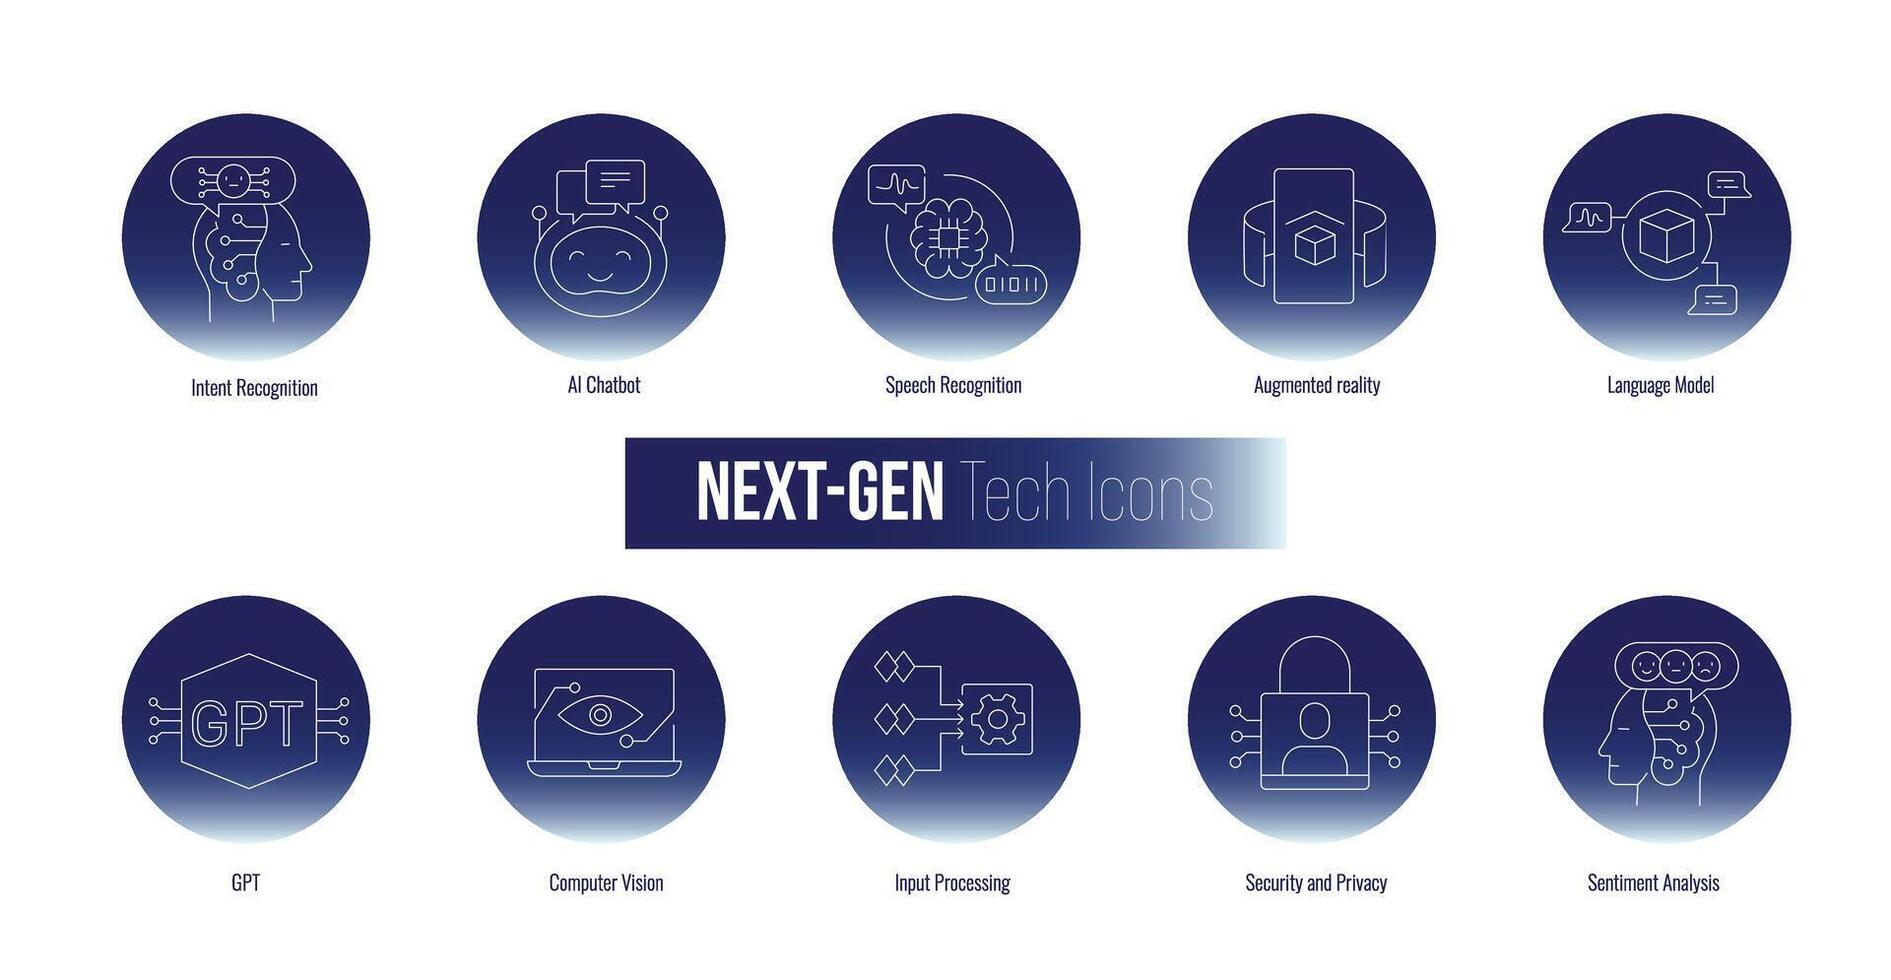 Next Gen Tech Icons. Icons for Sentiment Analysis, Language Model, Security and Privacy, Input Processing, GPT, Intent Recognition, Augmented reality and more vector